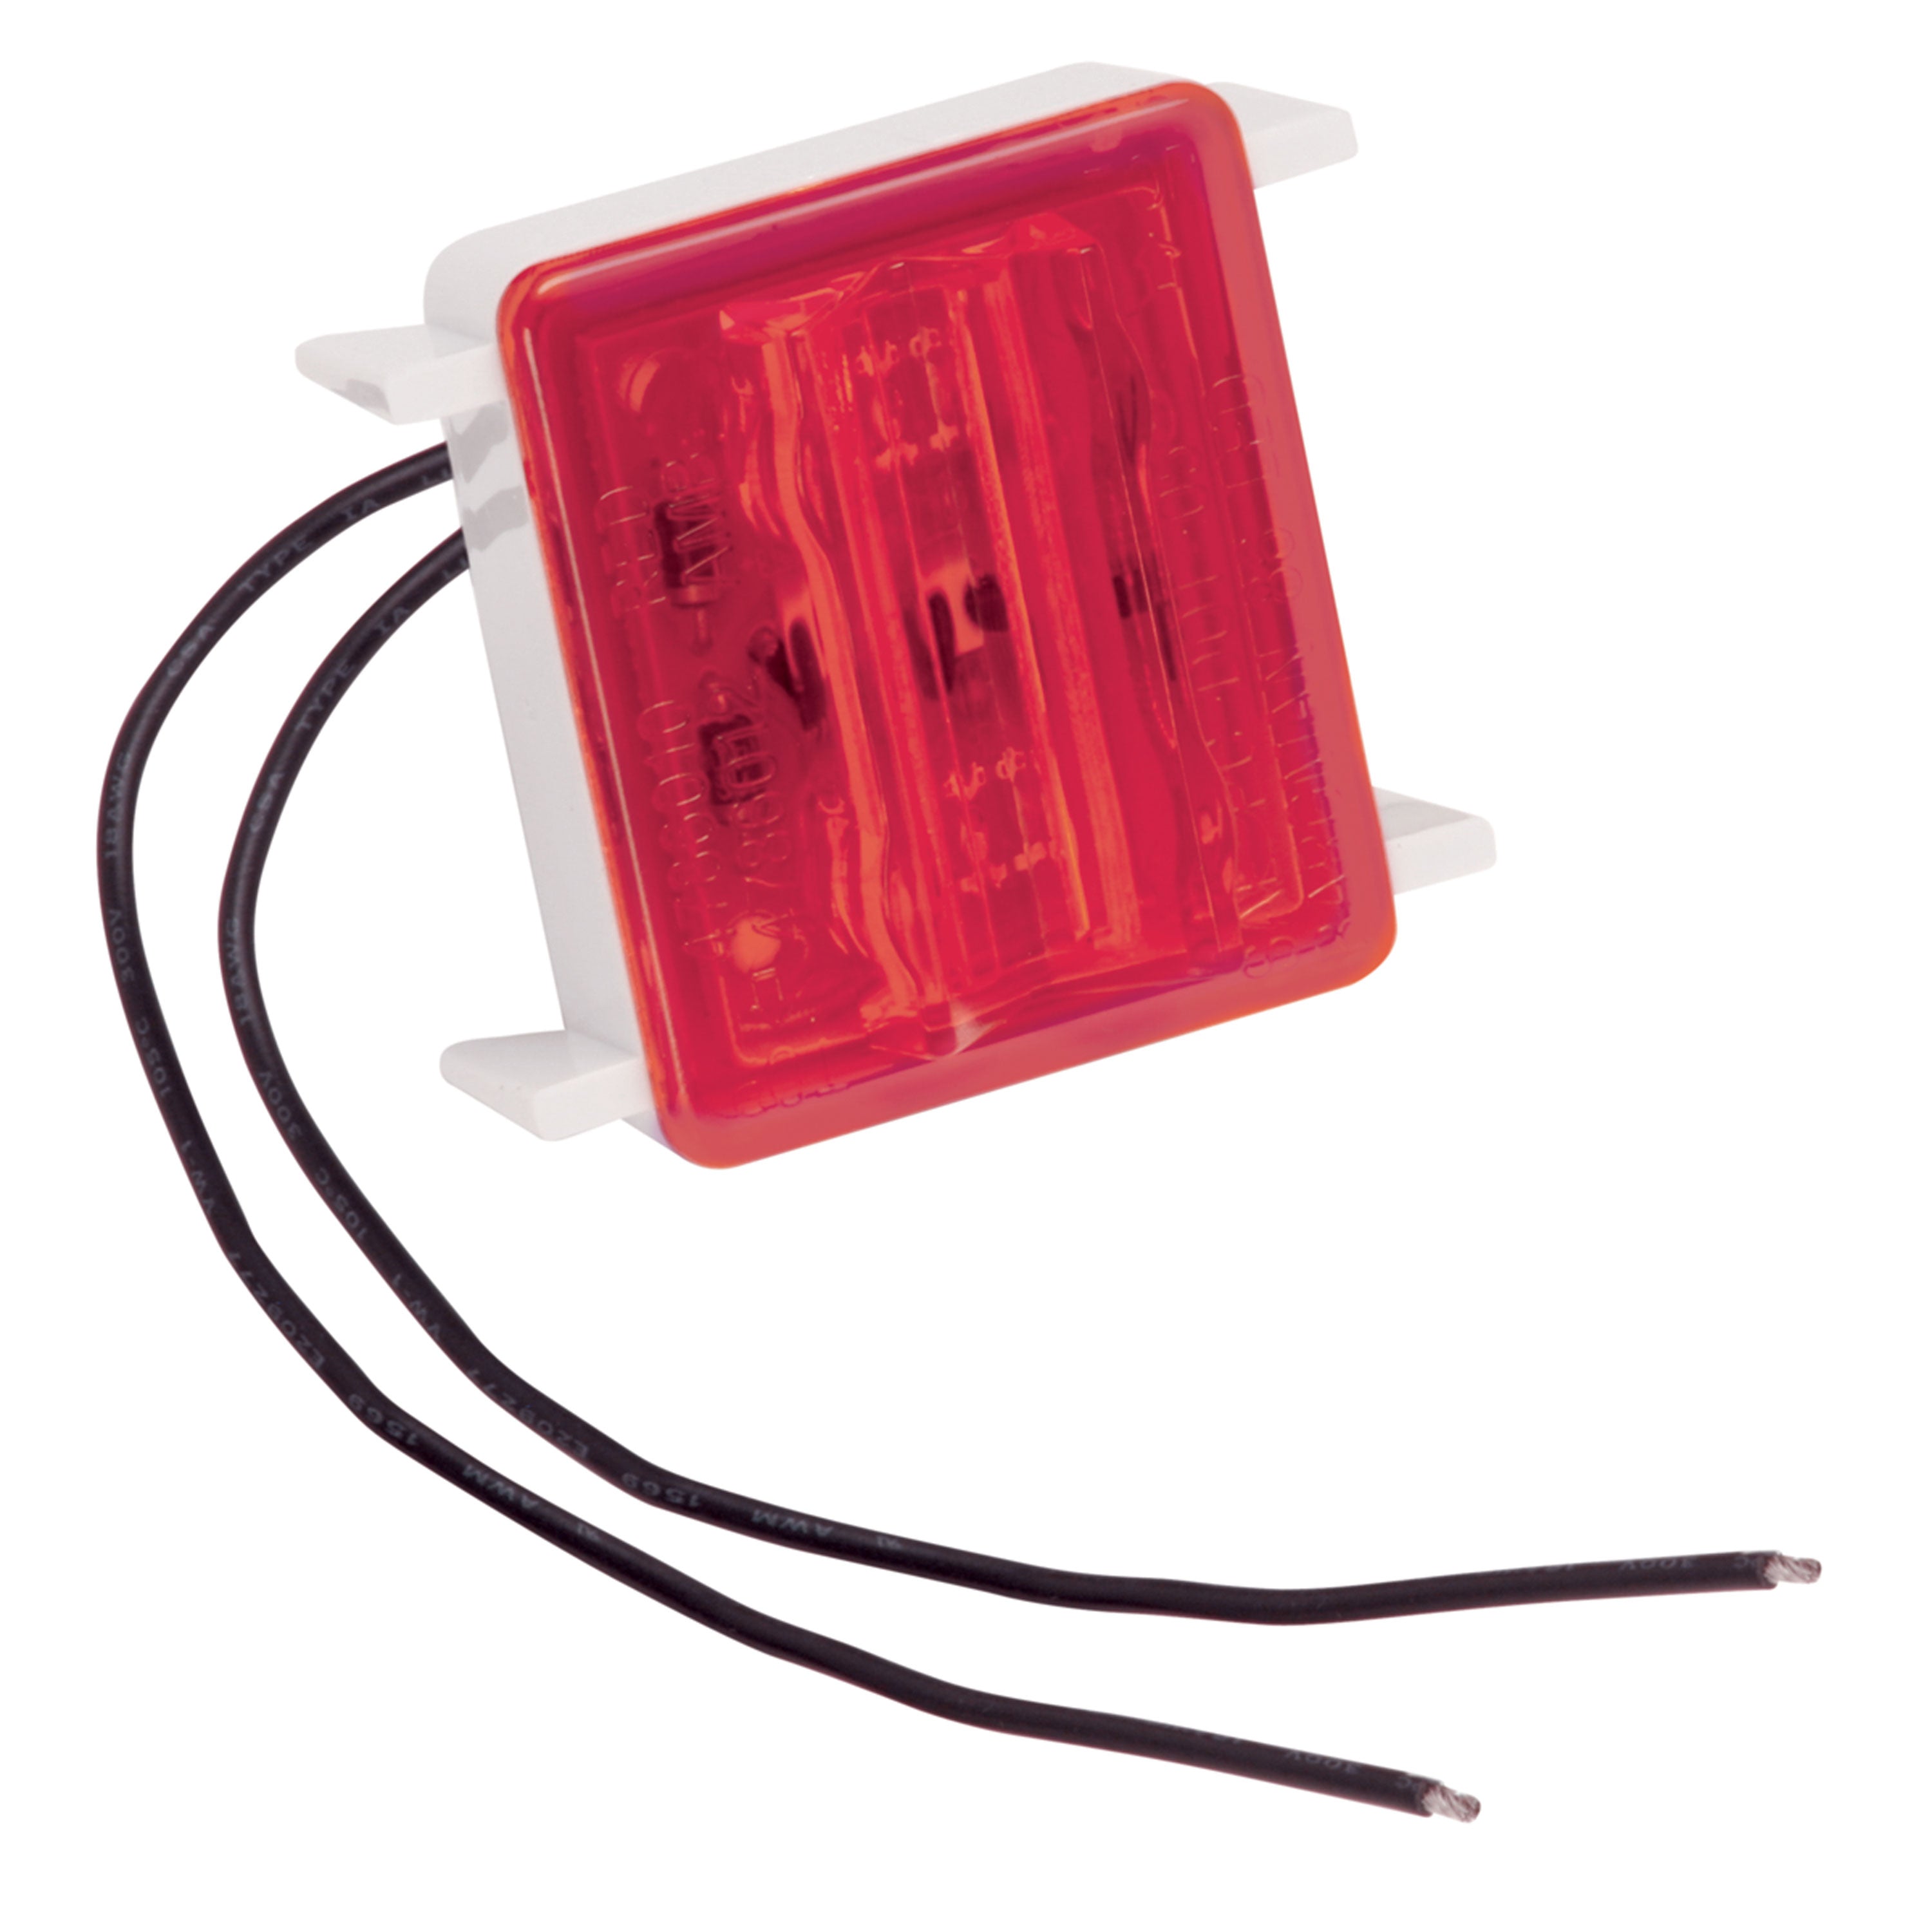 Bargman 42-86-410 Wrap Around Clearance Light #86 LED Upgrade Module - Red